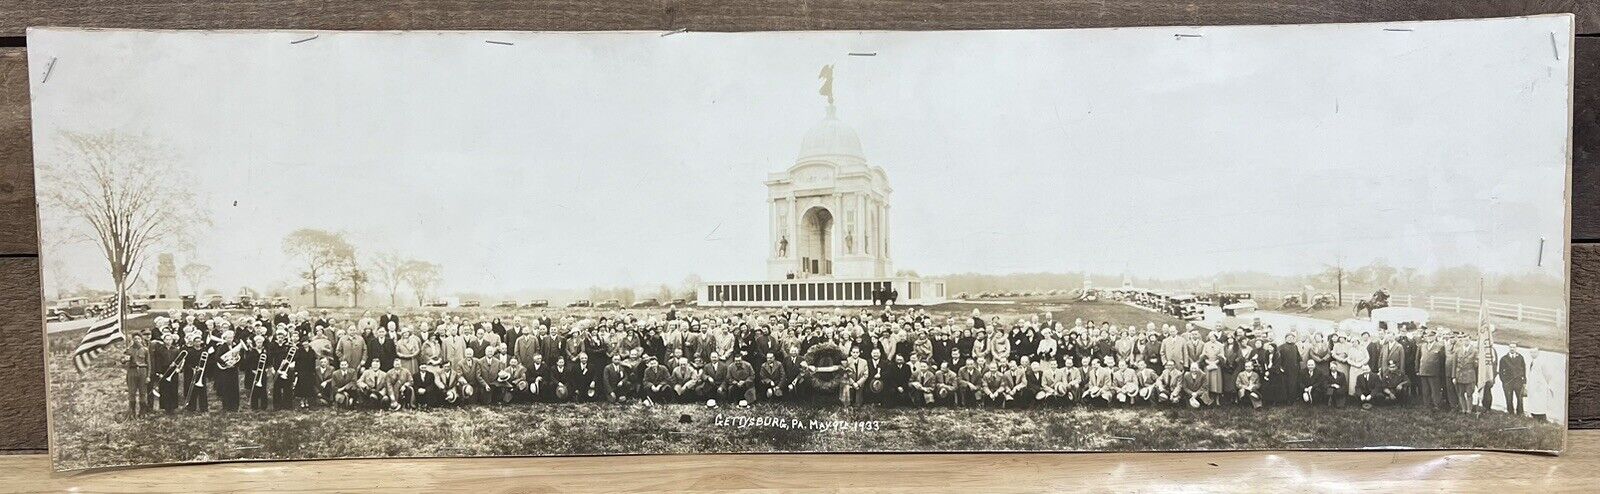 Antique 1933 Photo Of A Gathering At Gettysburg, PA 